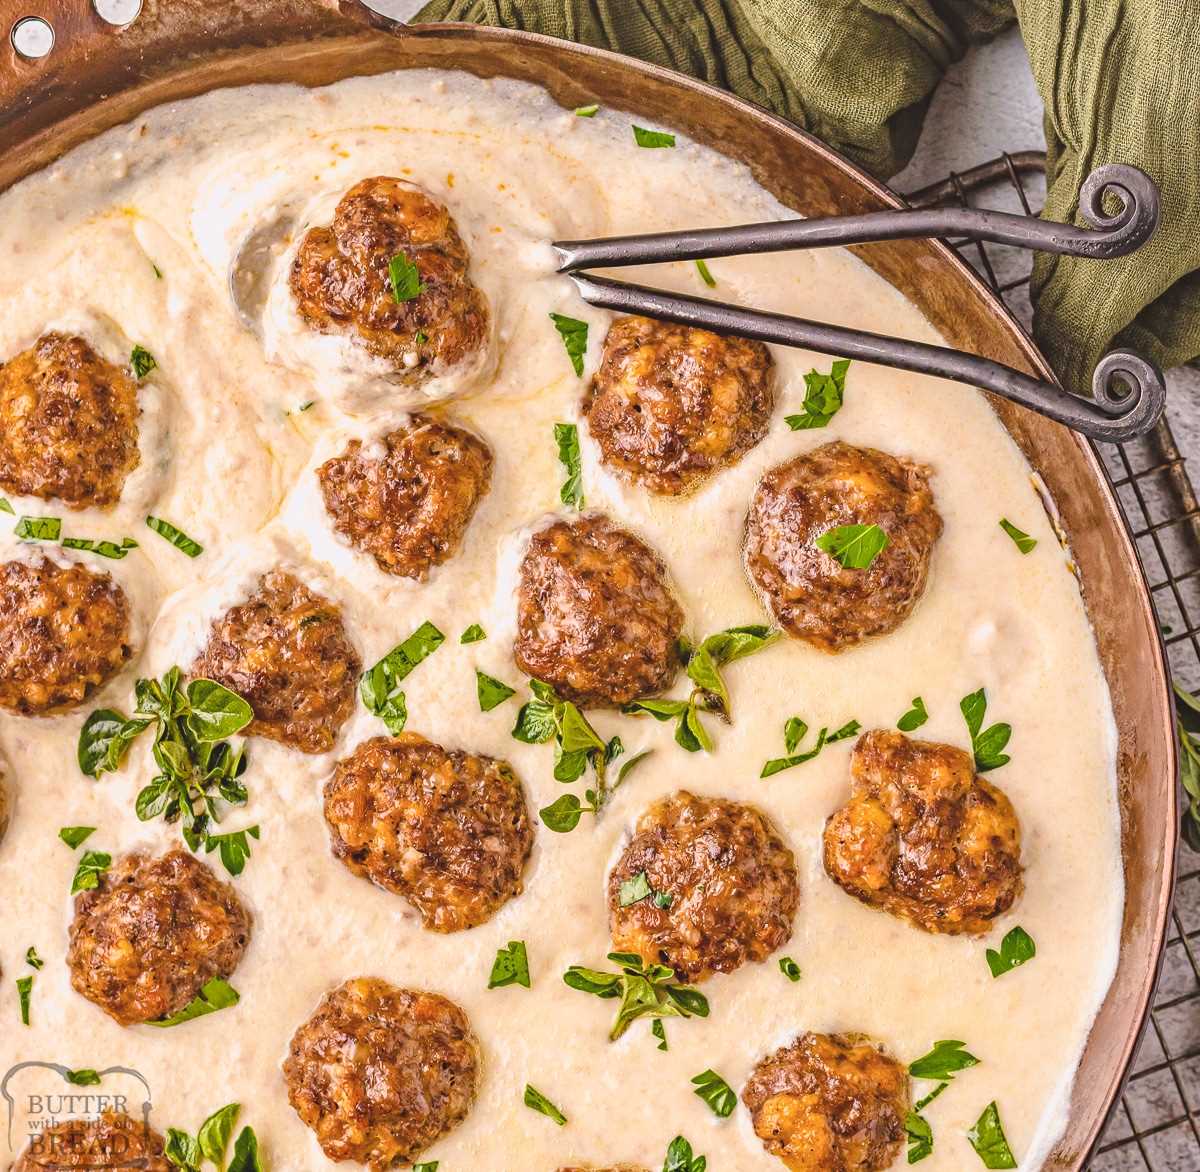 meatballs and gravy in a cast iron skillet